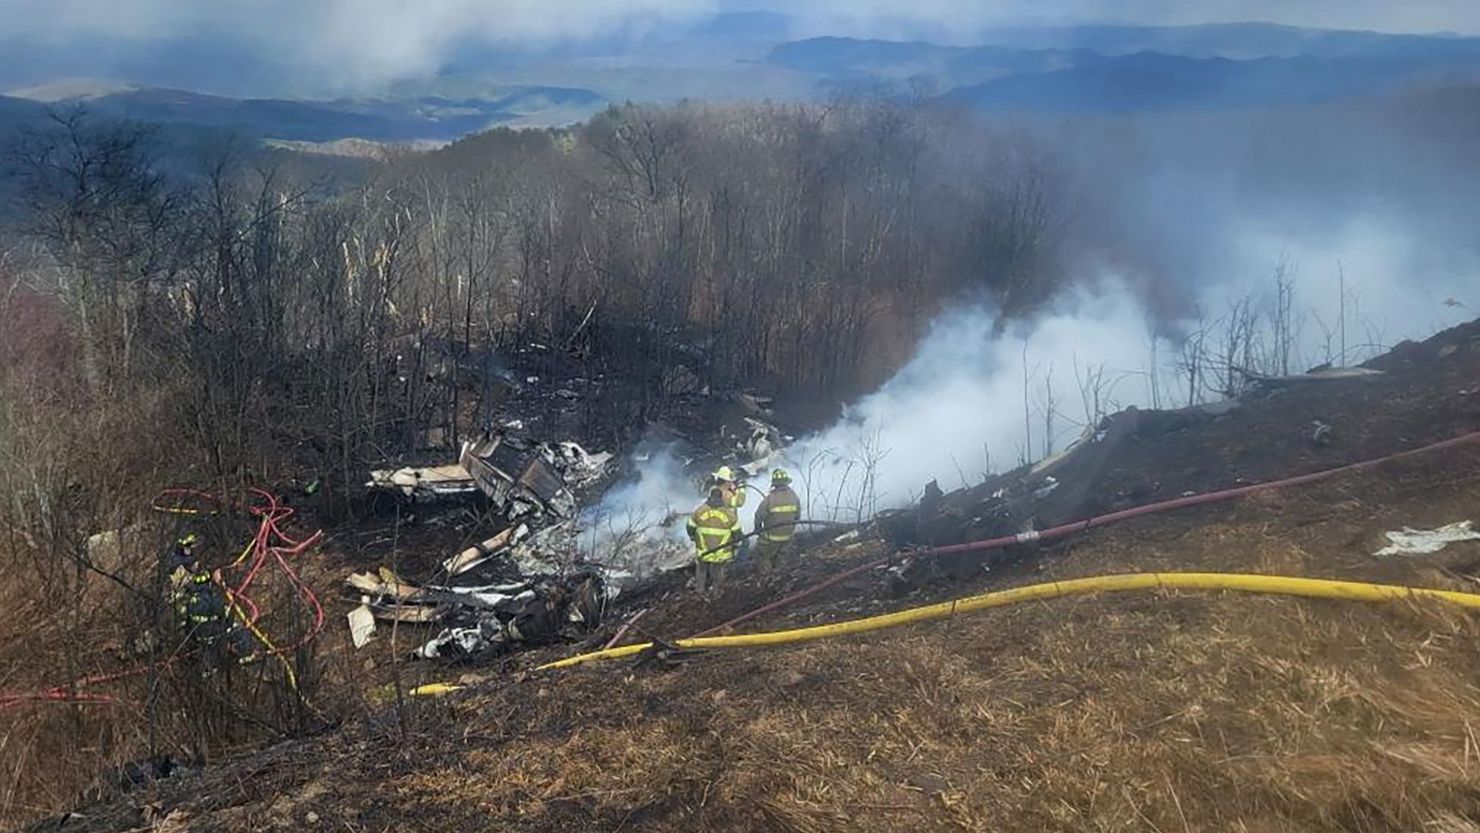 An emergency crew works at the site of a plane crash in Hot Springs, Virginia, on March 10.